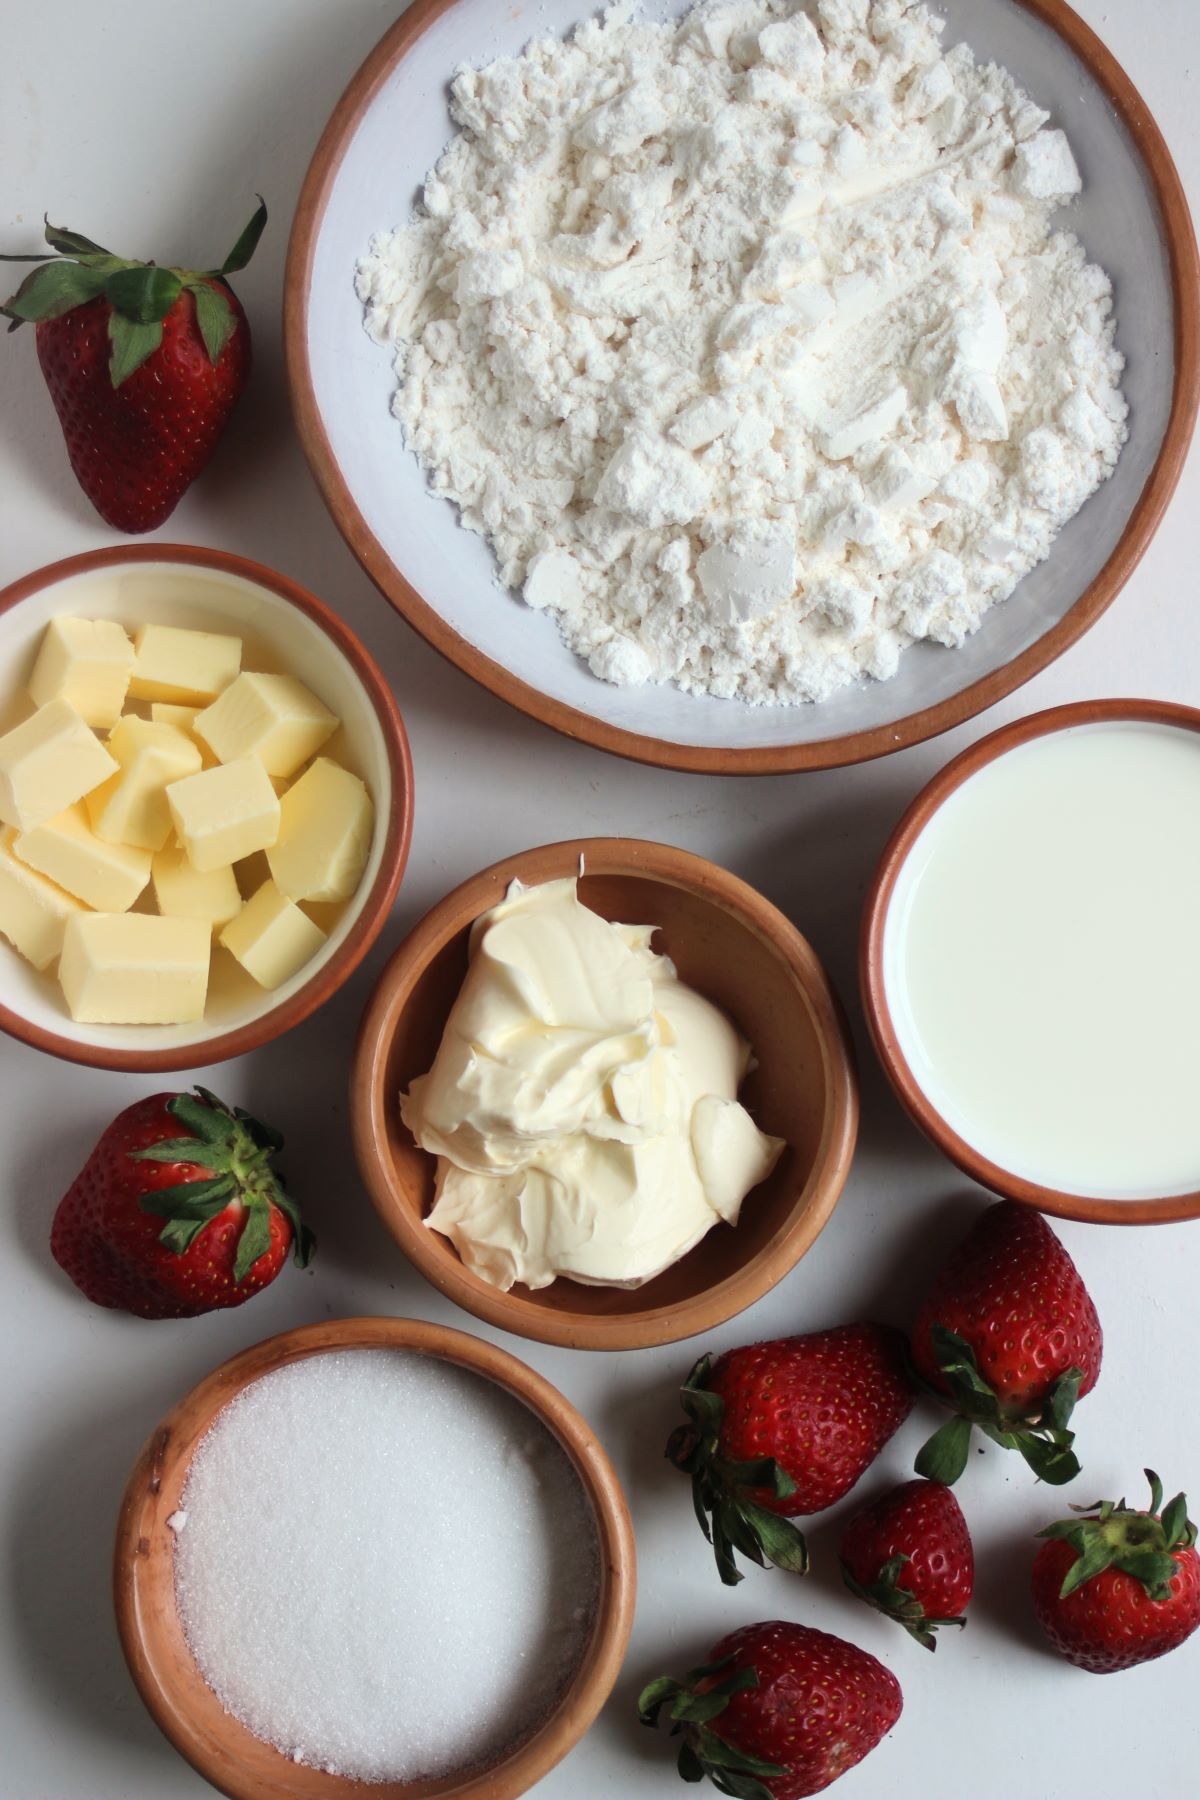 Strawberry shortcake ingredients in different plates, seen from above.